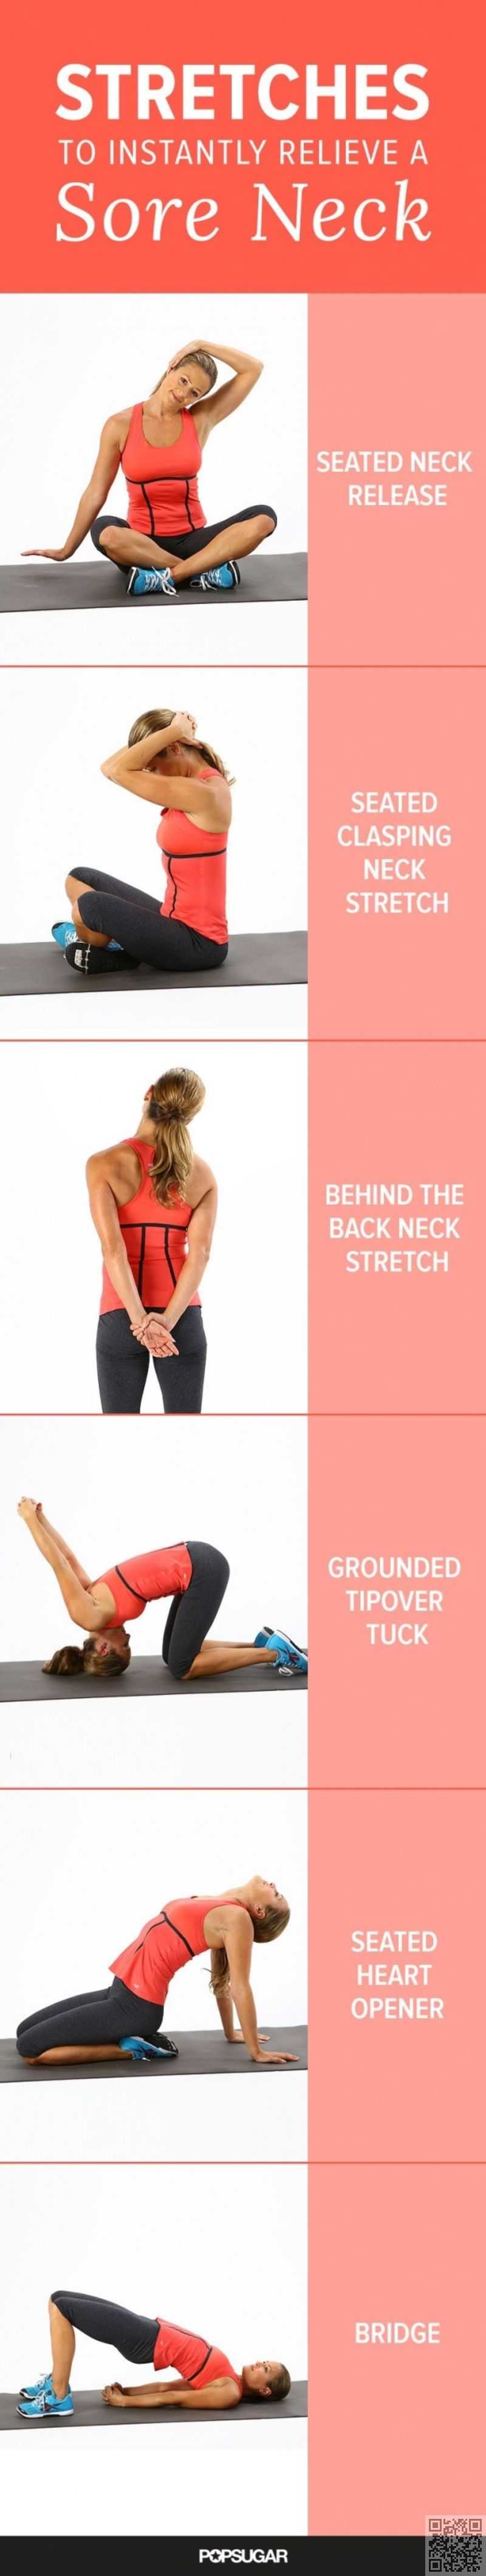 Stretches To Relieve A Sore Neck